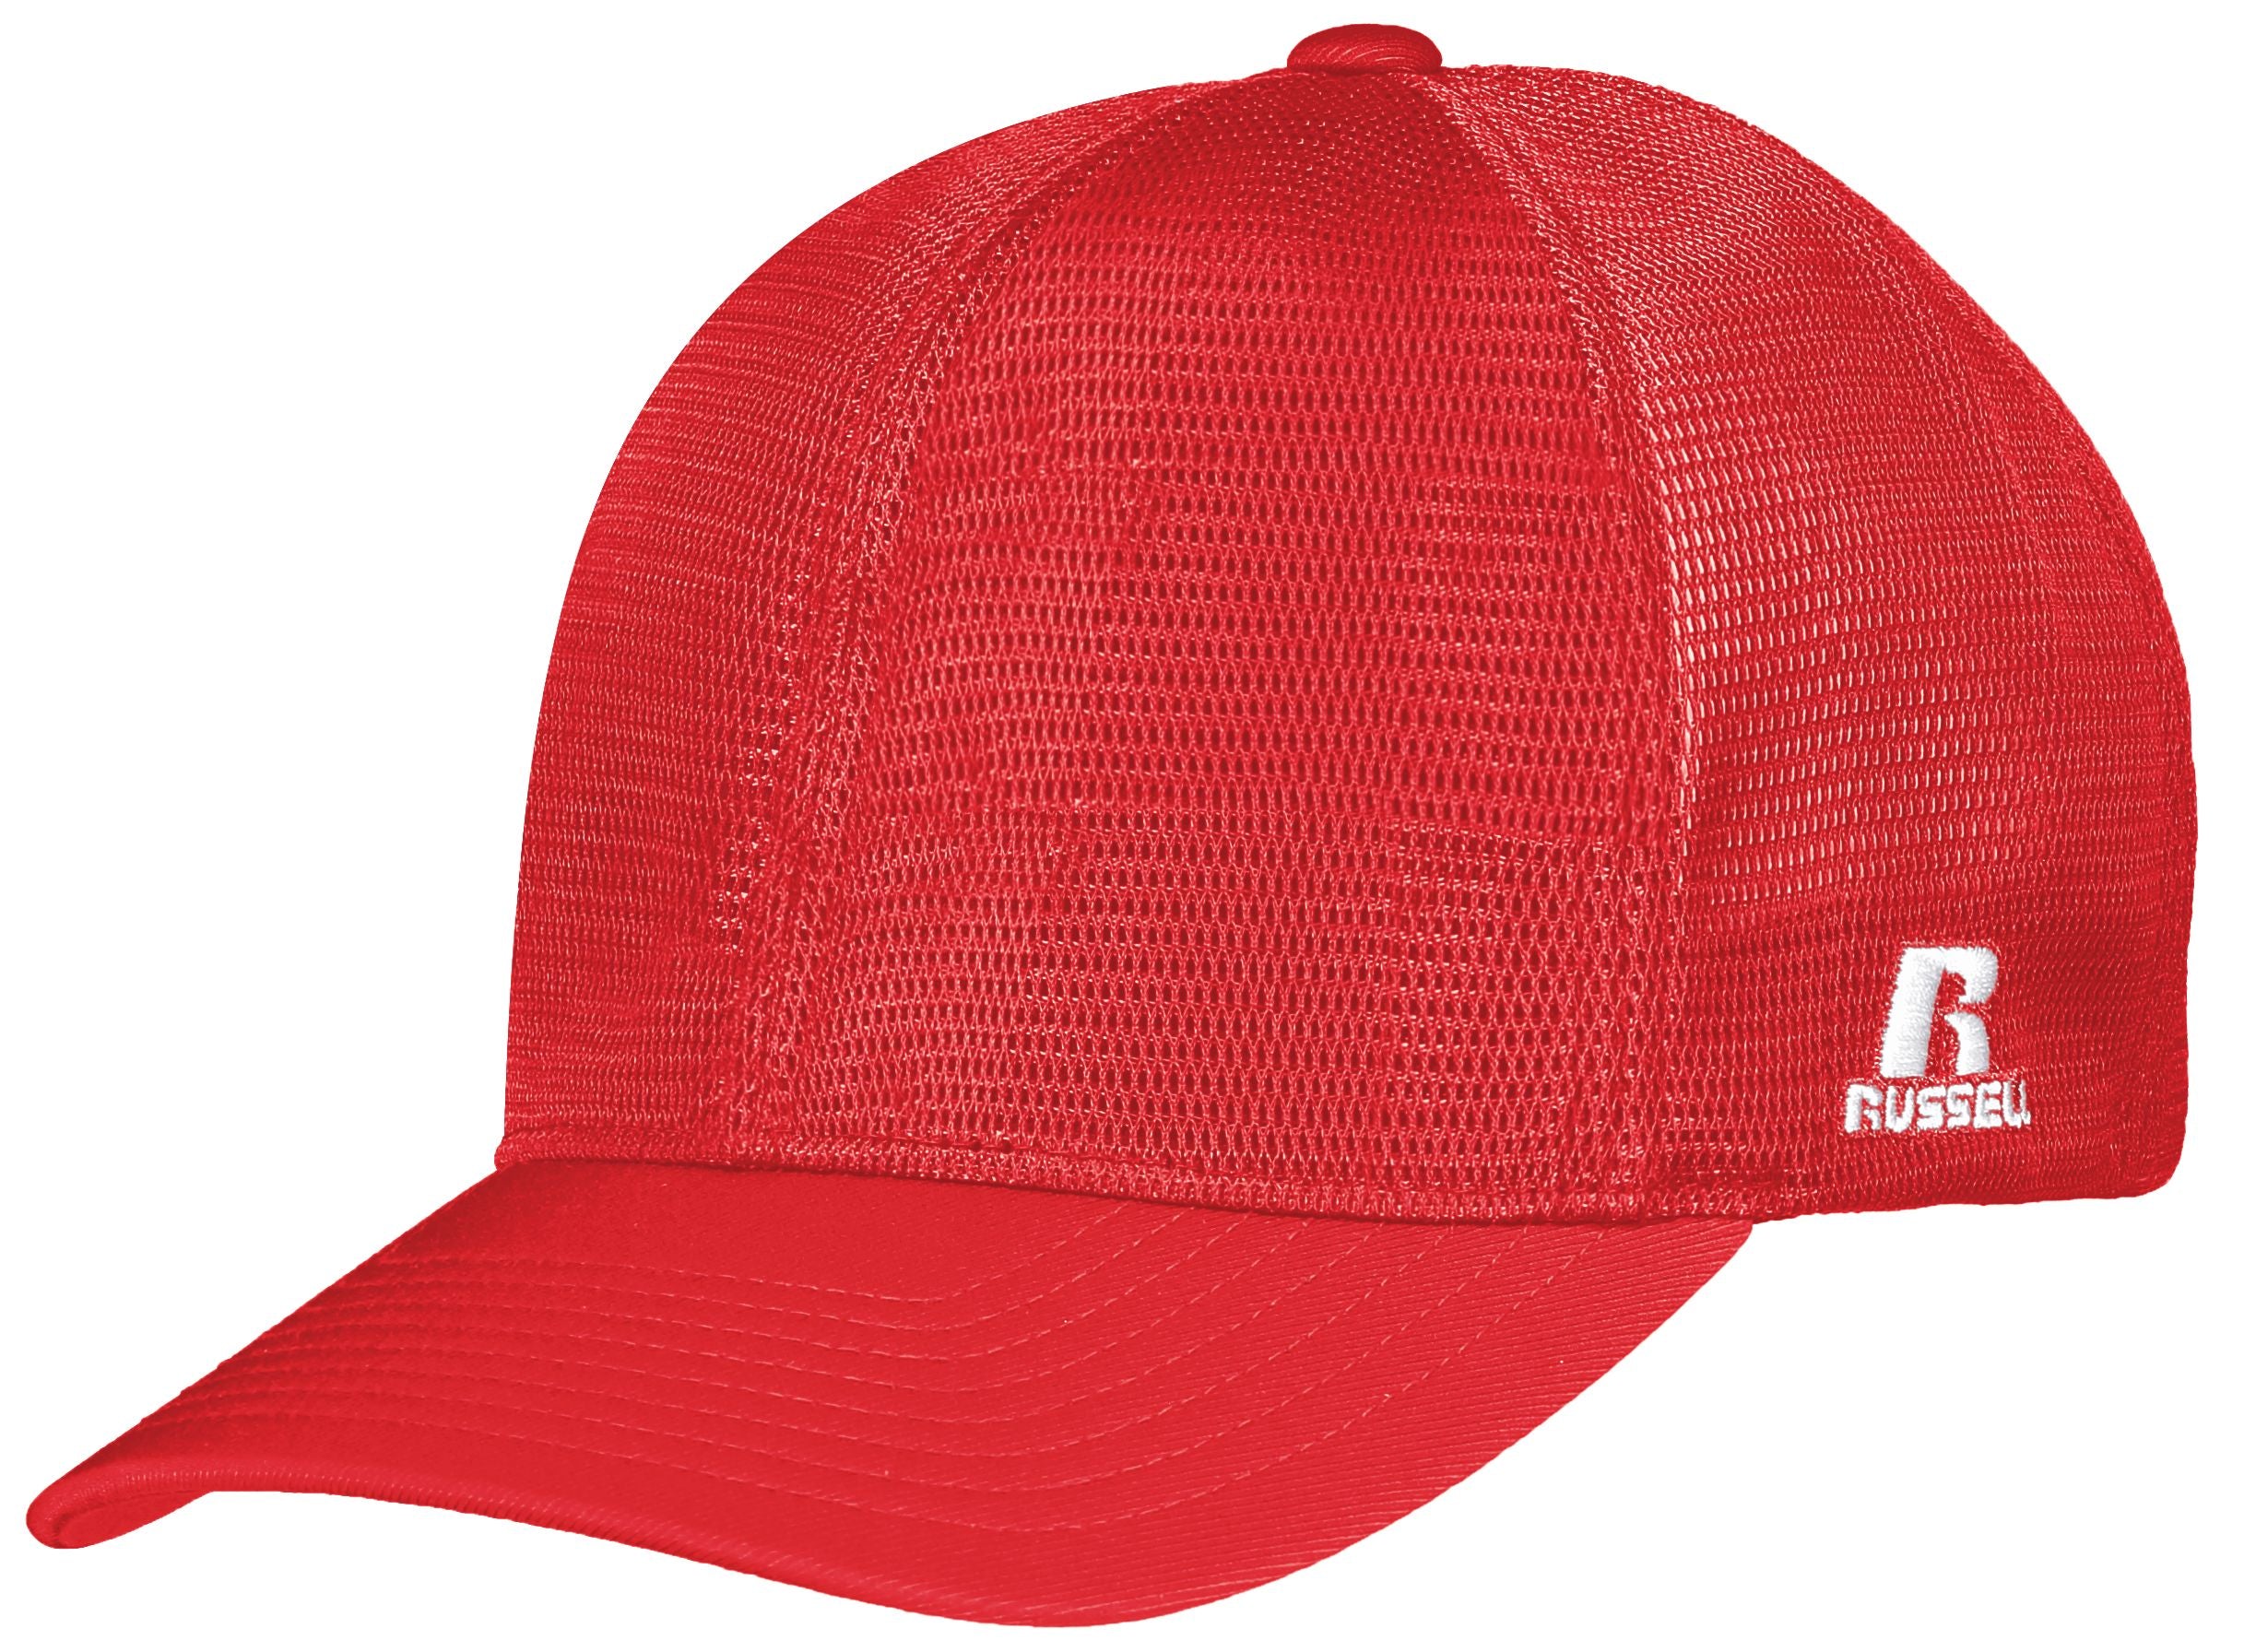 Russell Athletic Flexfit 360 Mesh Cap in True Red  -Part of the Adult, Headwear, Headwear-Cap, Russell-Athletic-Products product lines at KanaleyCreations.com